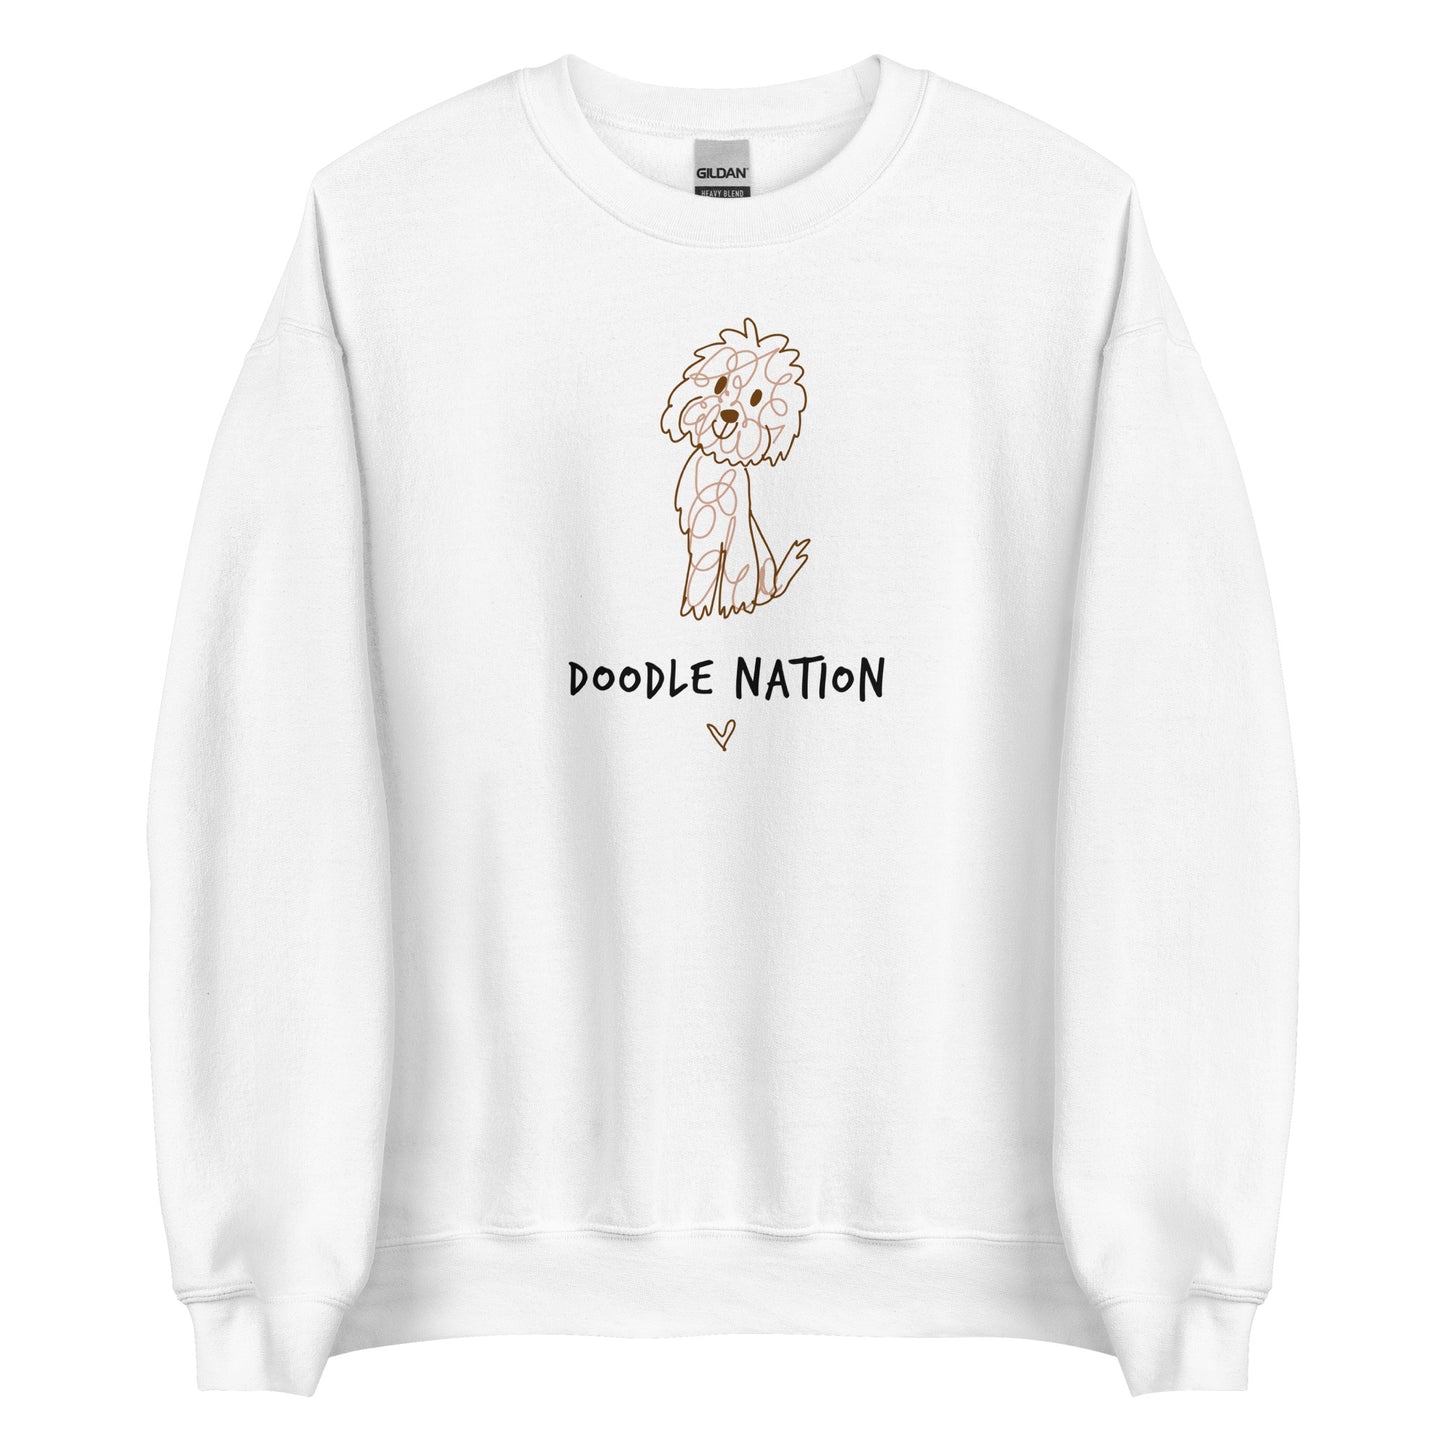 White crew neck sweatshirt with hand drawn dog design and saying Doodle Nation